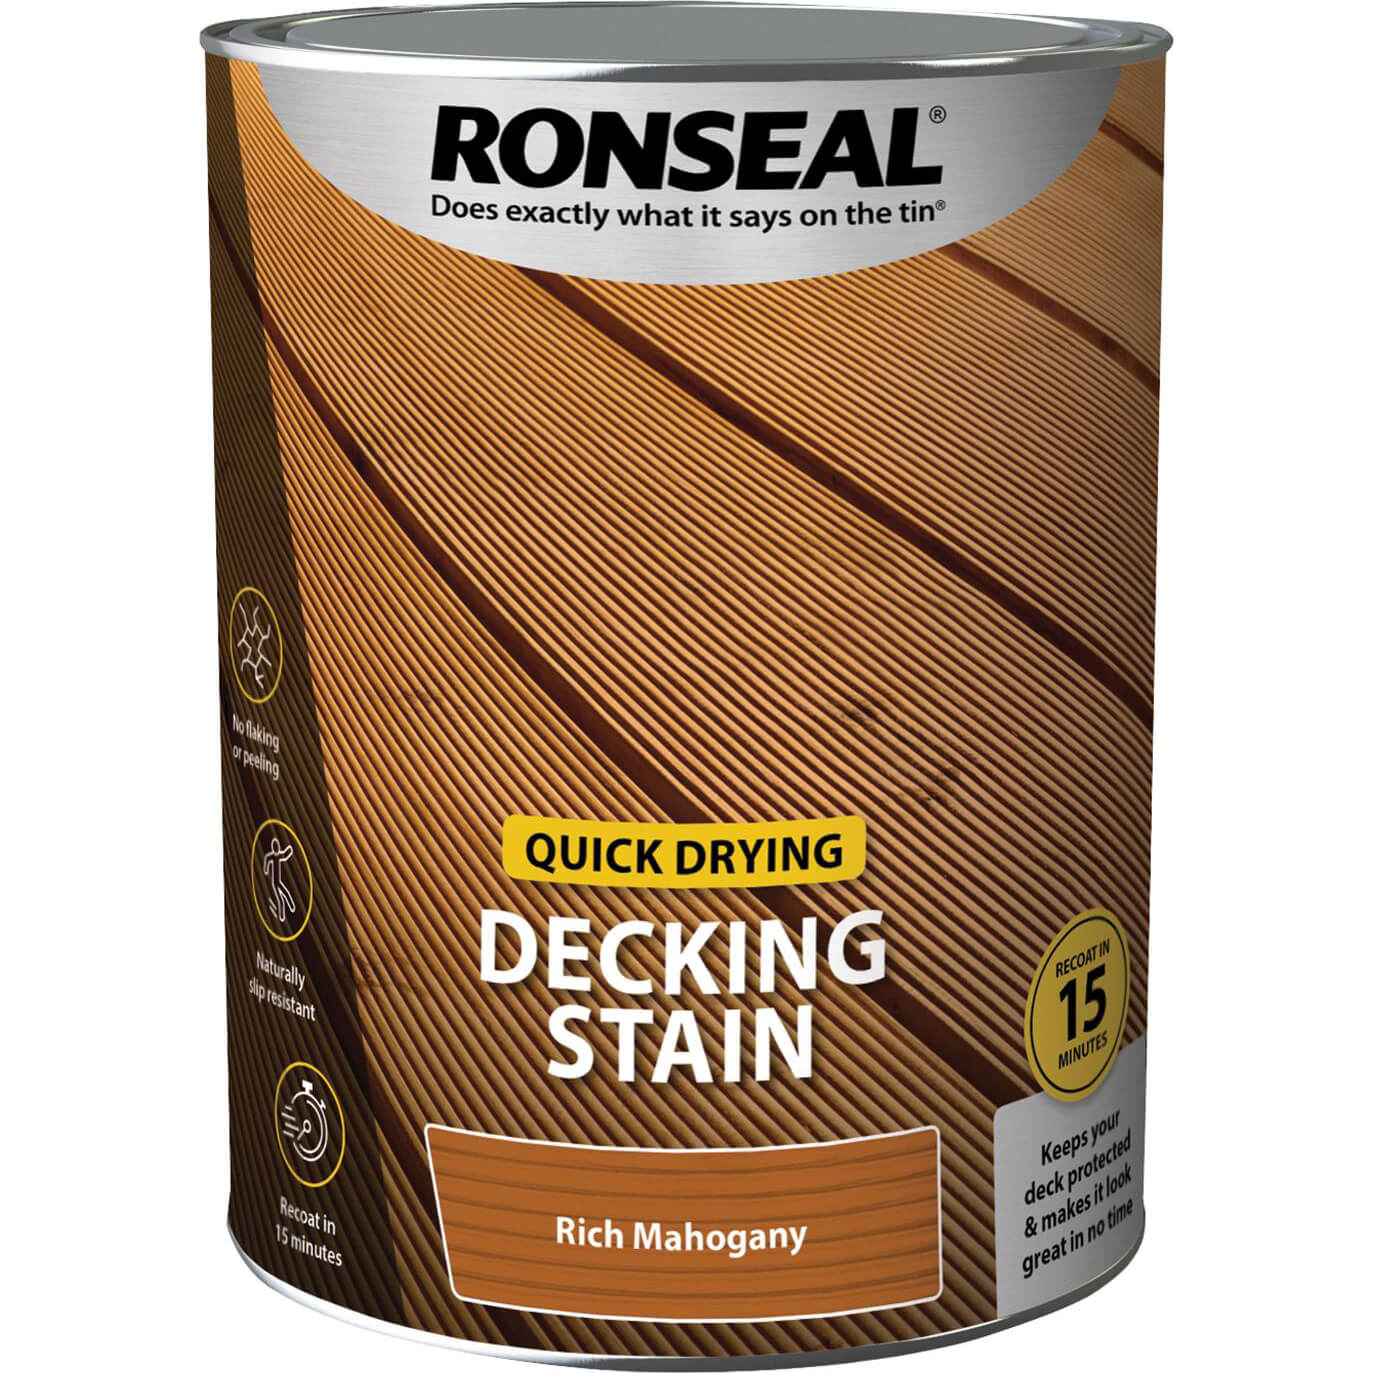 Ronseal Quick Drying Decking Stain Rich Mahogany - 5L